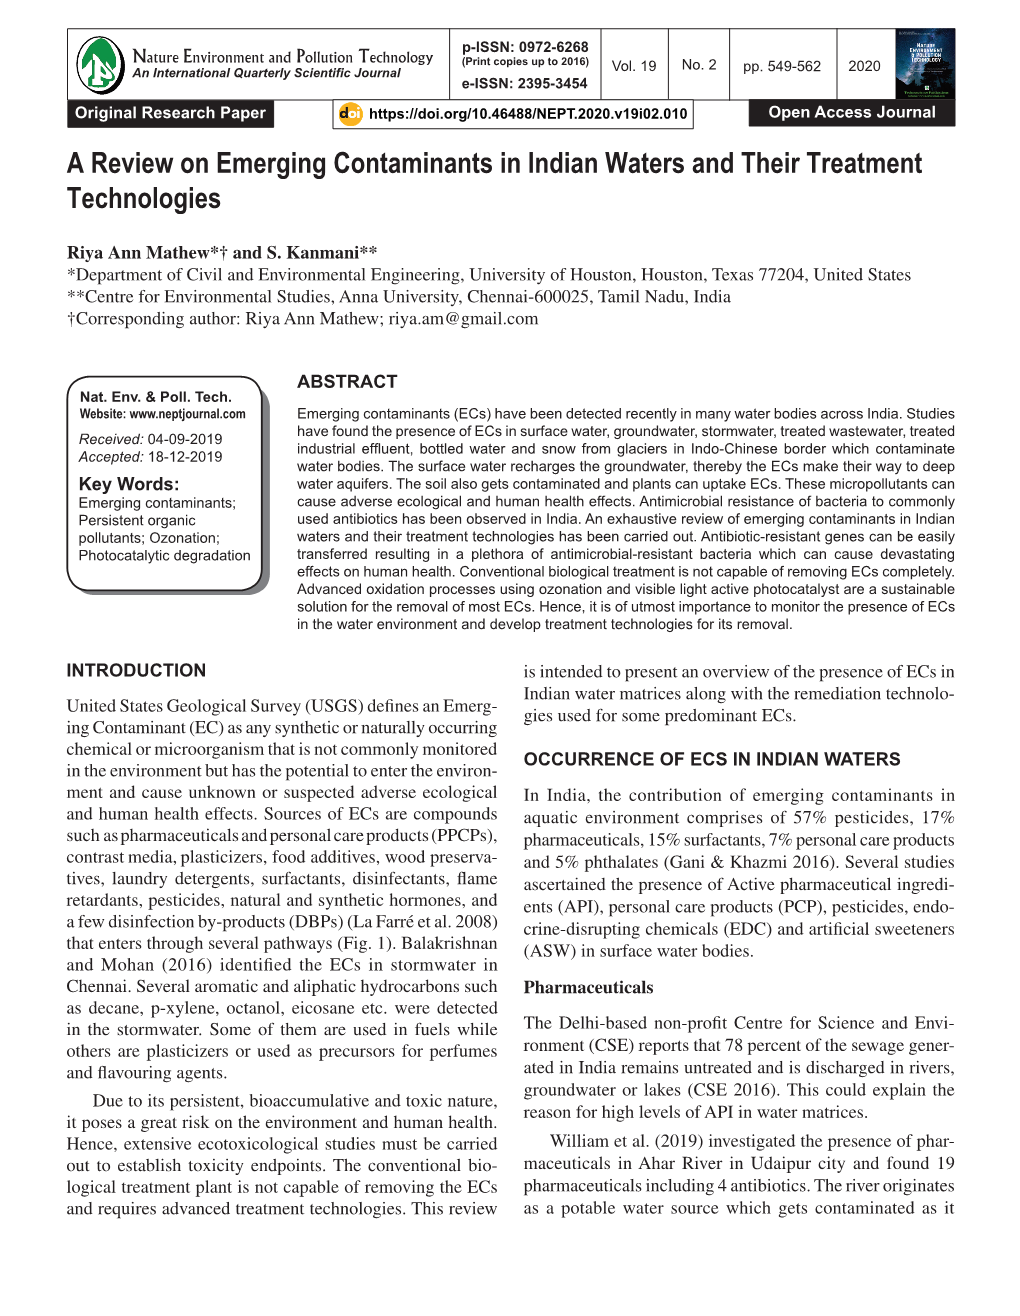 A Review on Emerging Contaminants in Indian Waters and Their Treatment Technologies